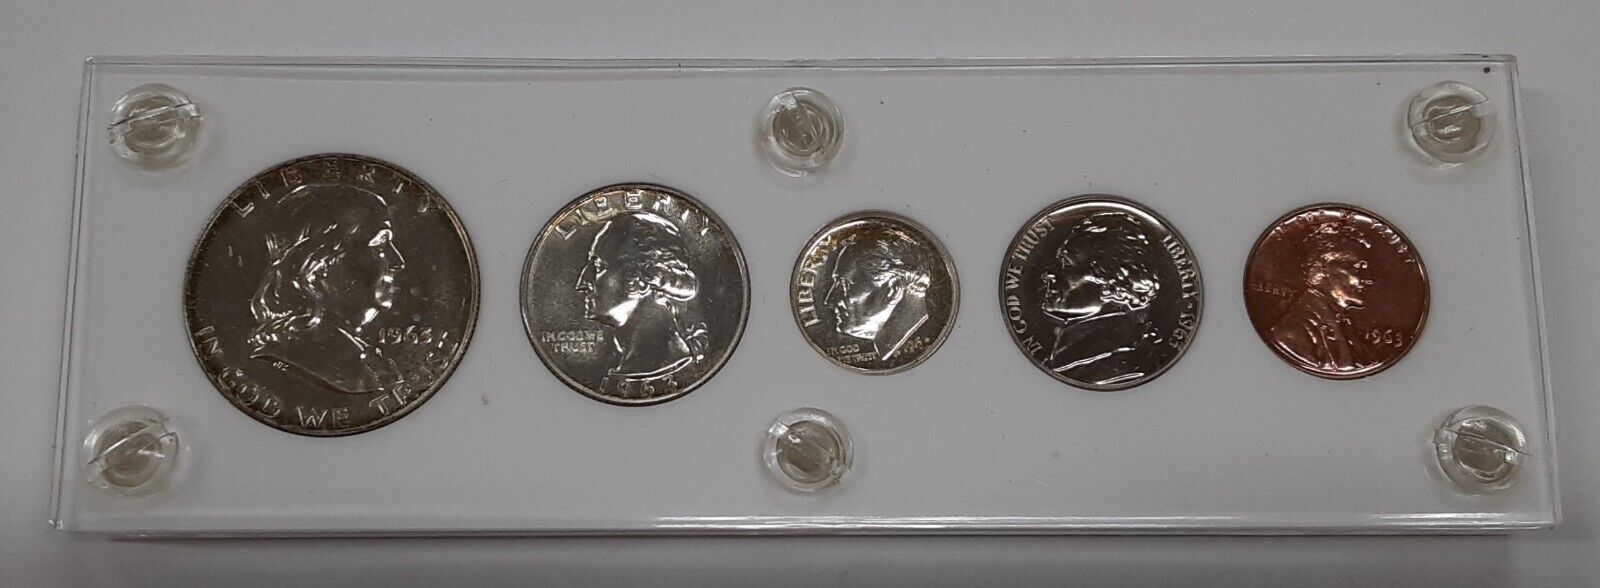 1963 US Mint Silver Proof Set 5 Gem Coins in White Acrylic Holder  (D)